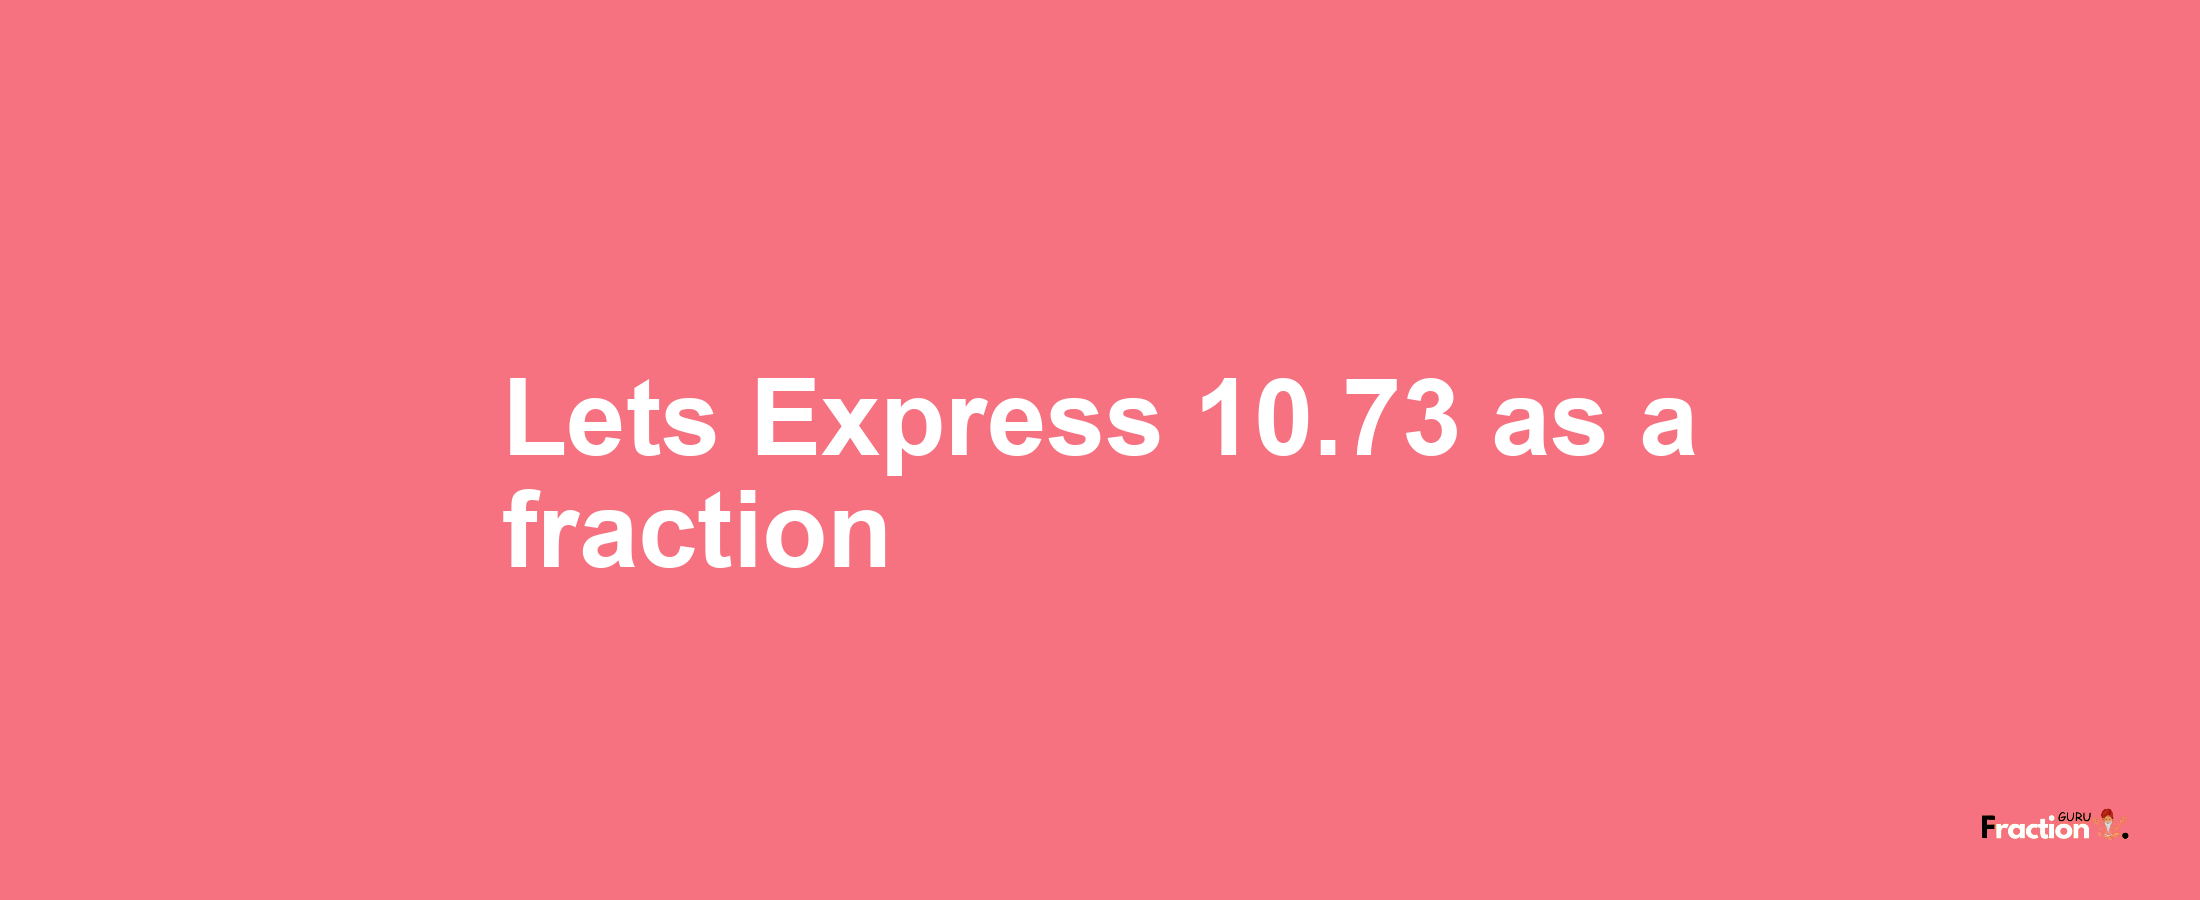 Lets Express 10.73 as afraction